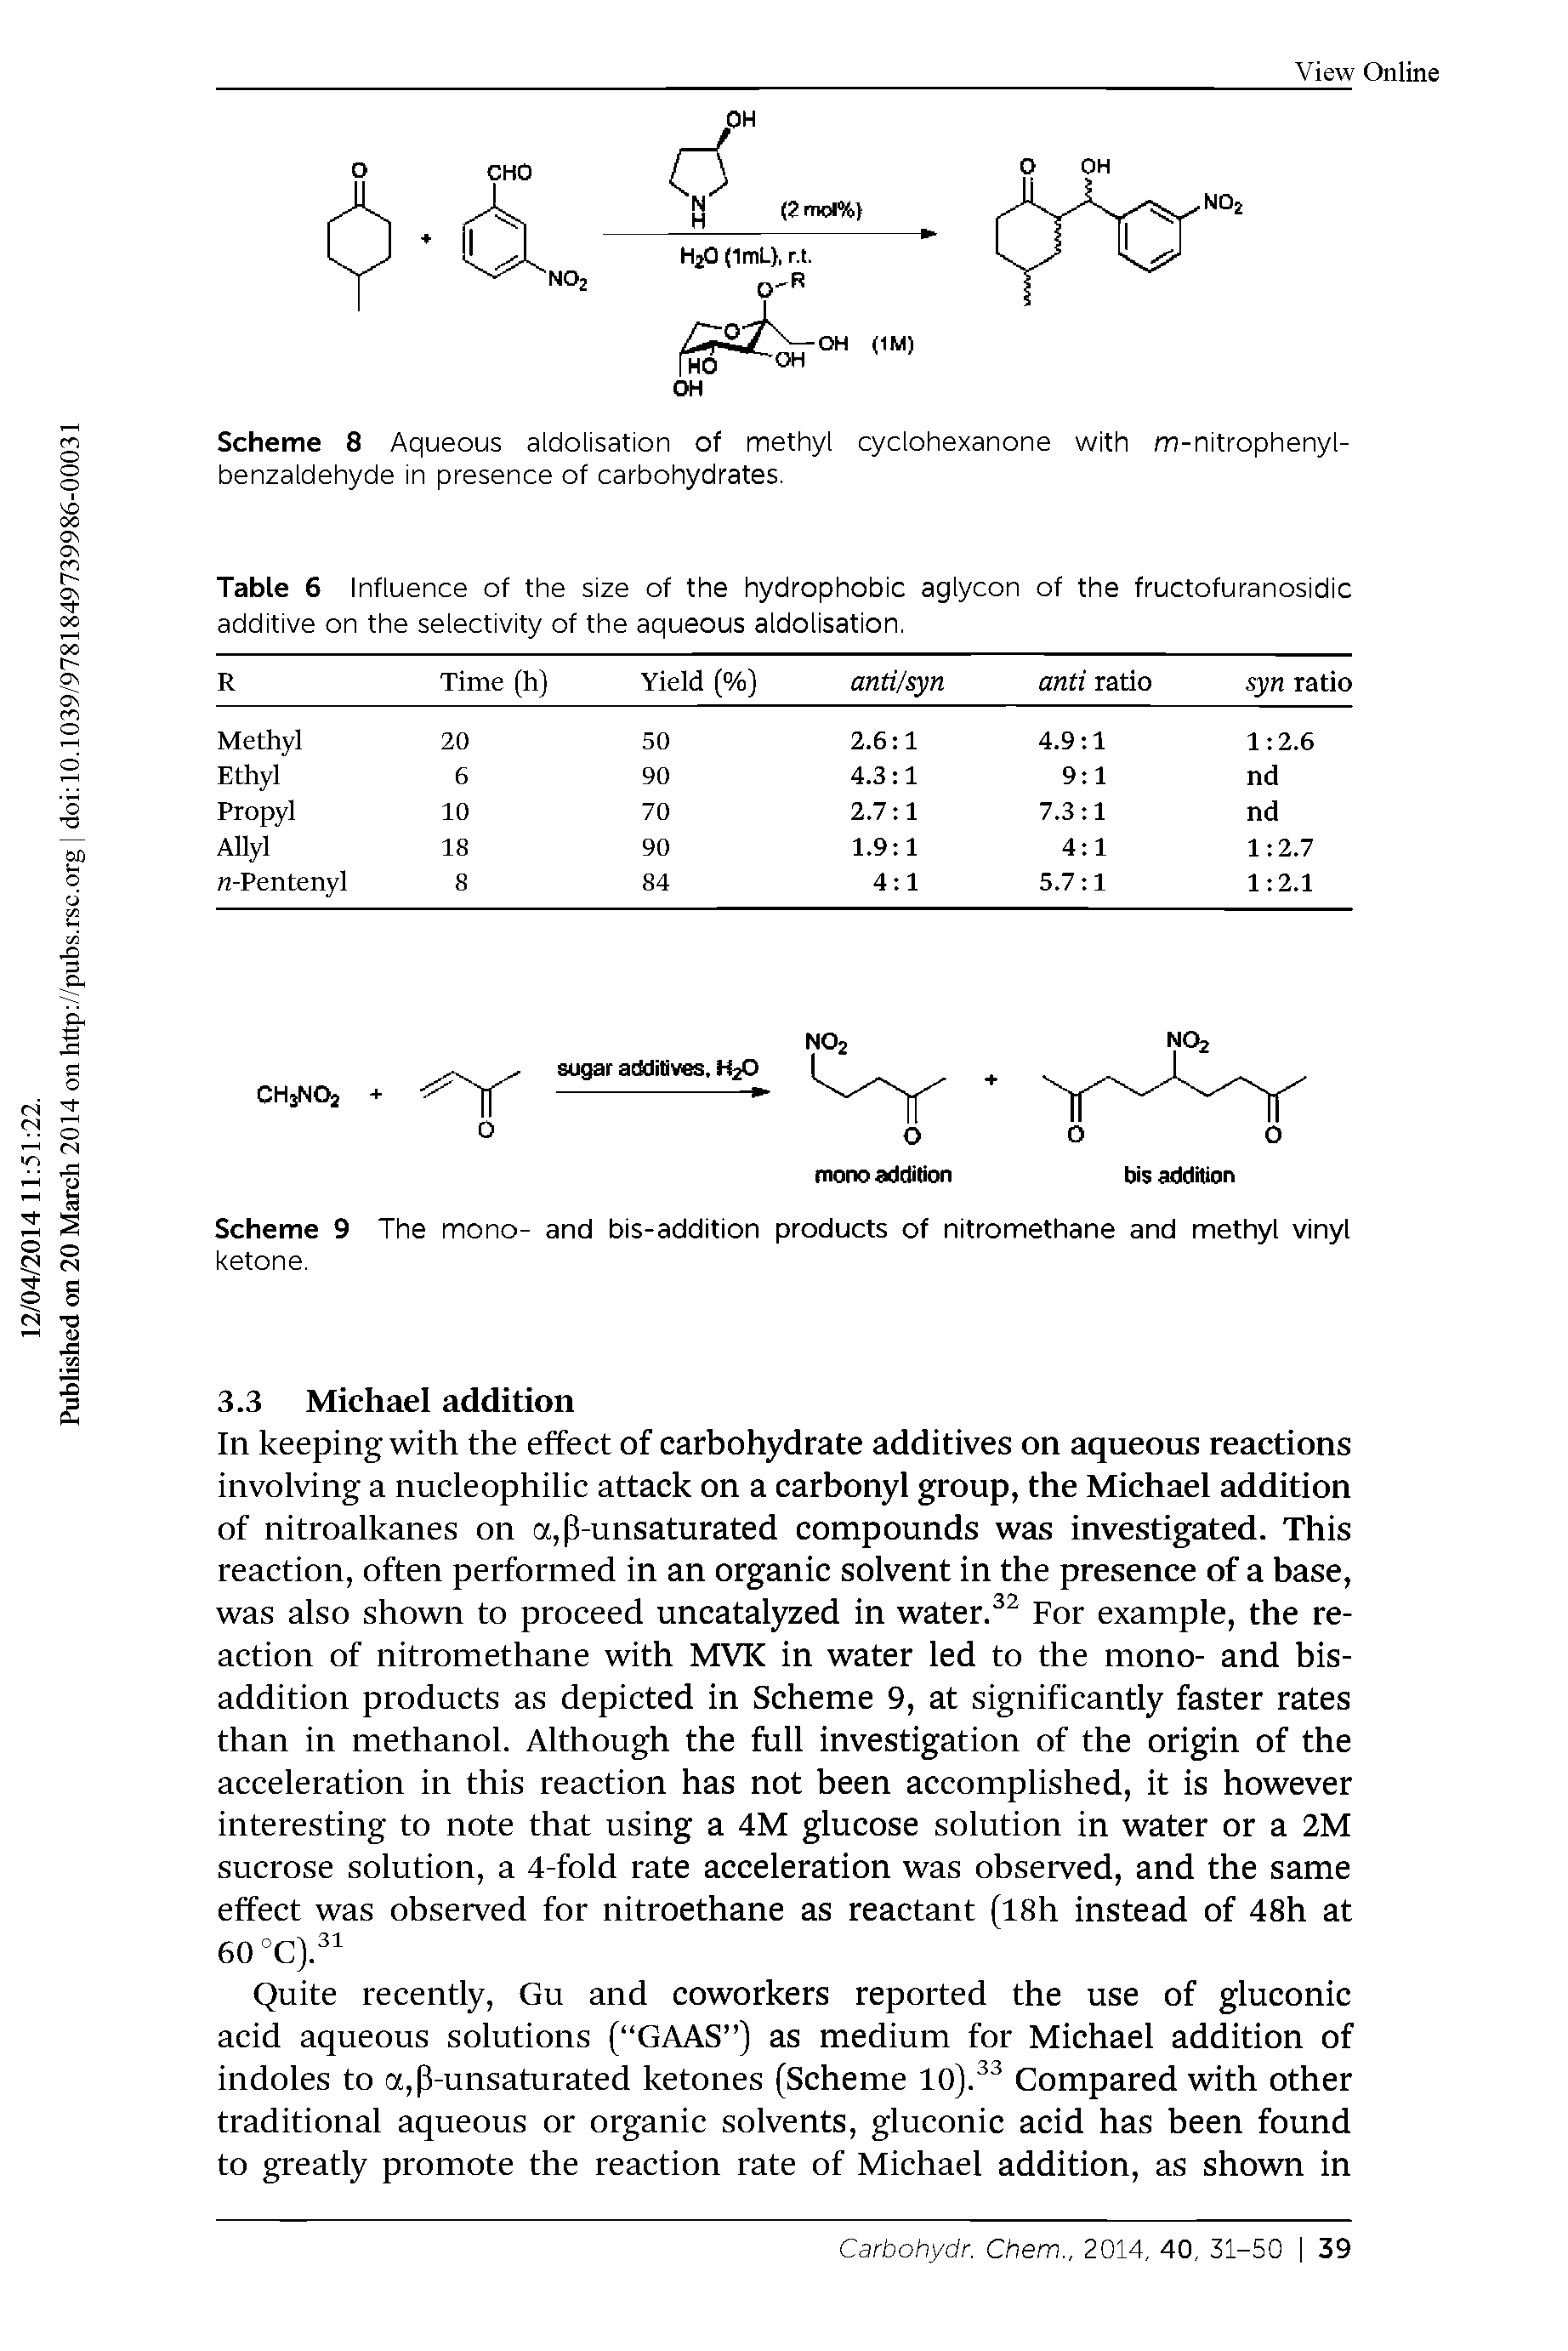 Table 6 Influence of the size of the hydrophobic aglycon of the fructofuranosidic additive on the selectivity of the aqueous aldolisation,...